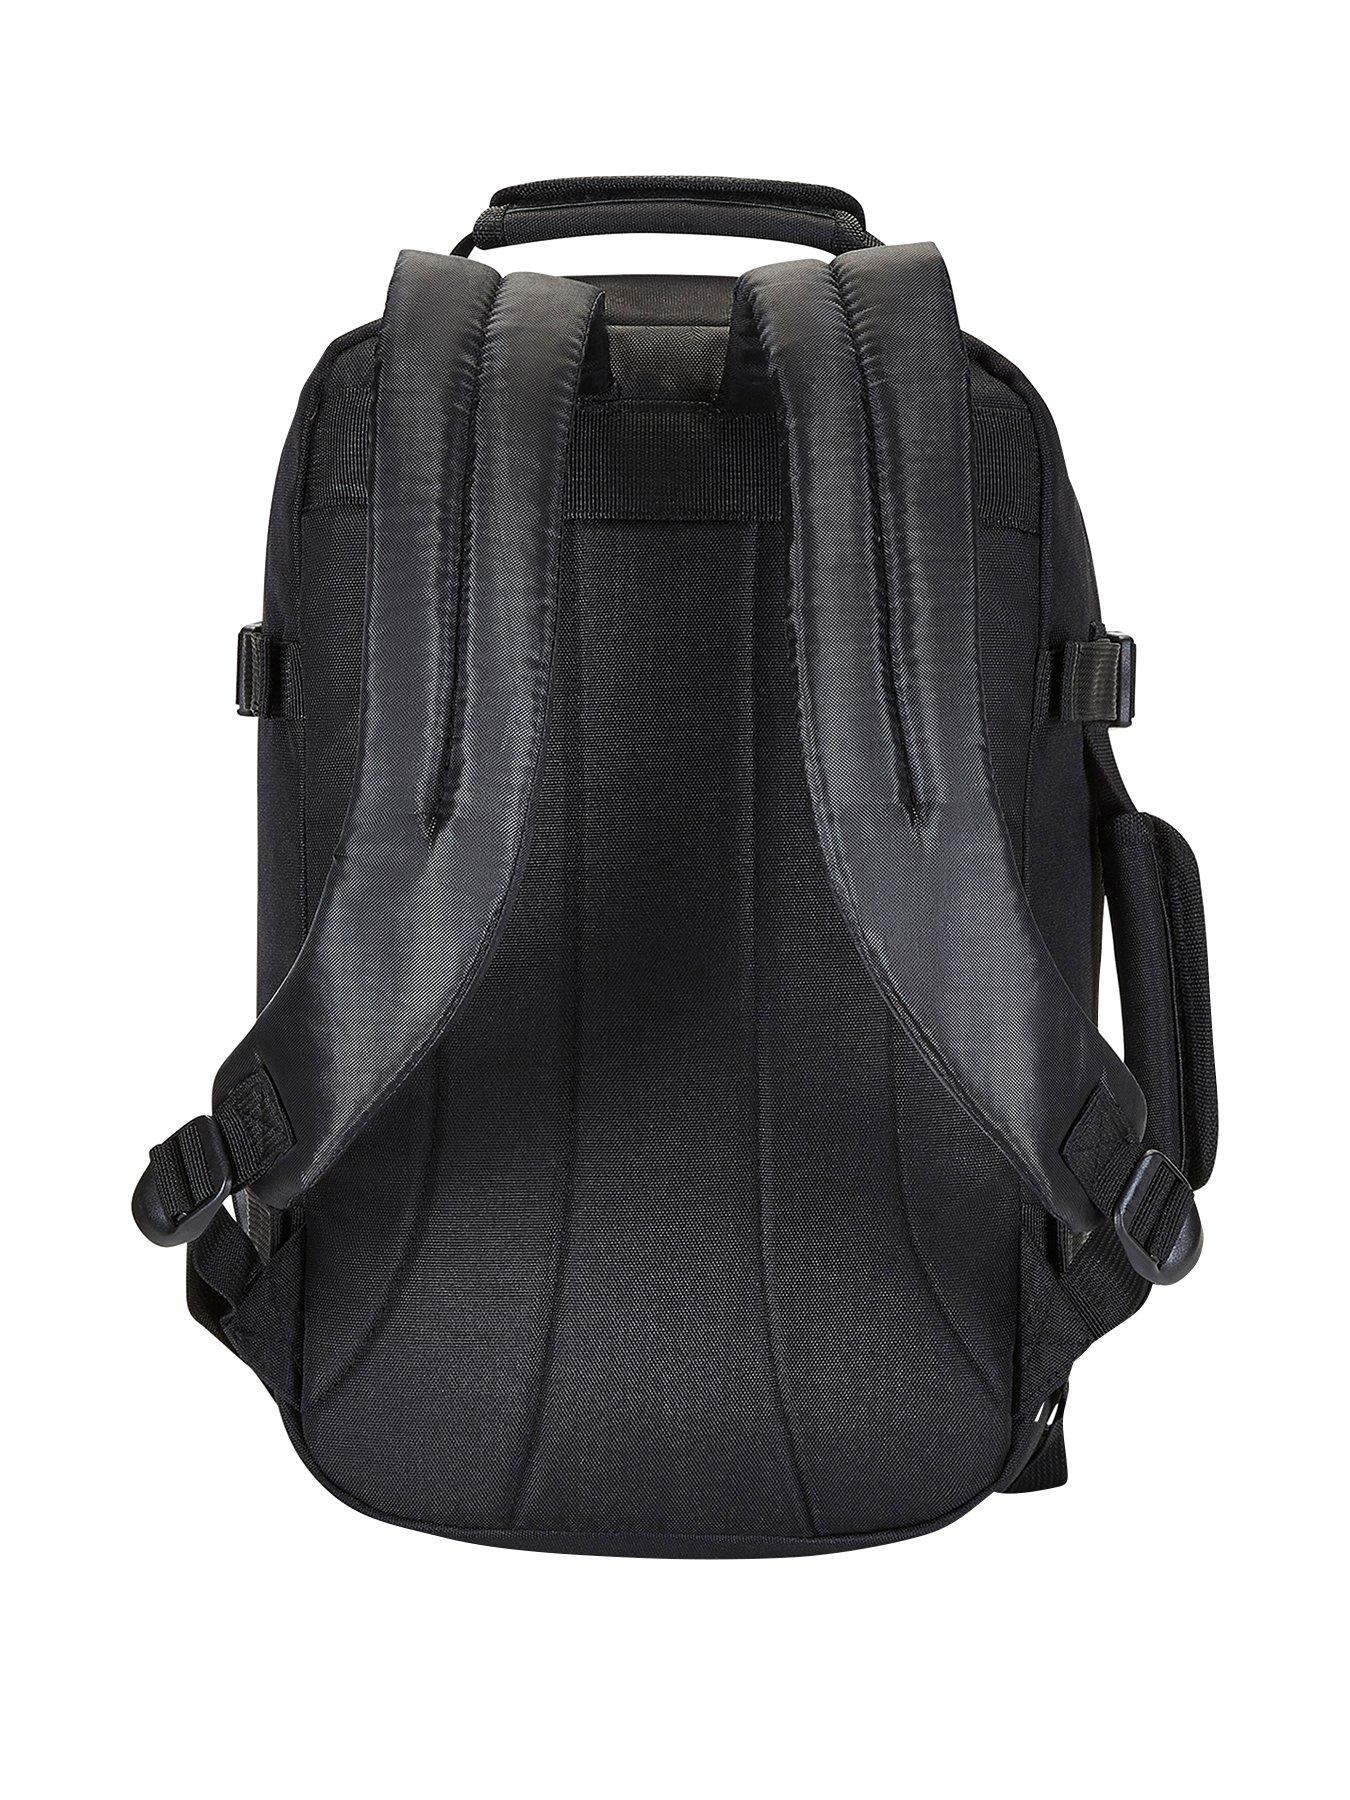 Rock Luggage Small Cabin Backpack - Black | very.co.uk